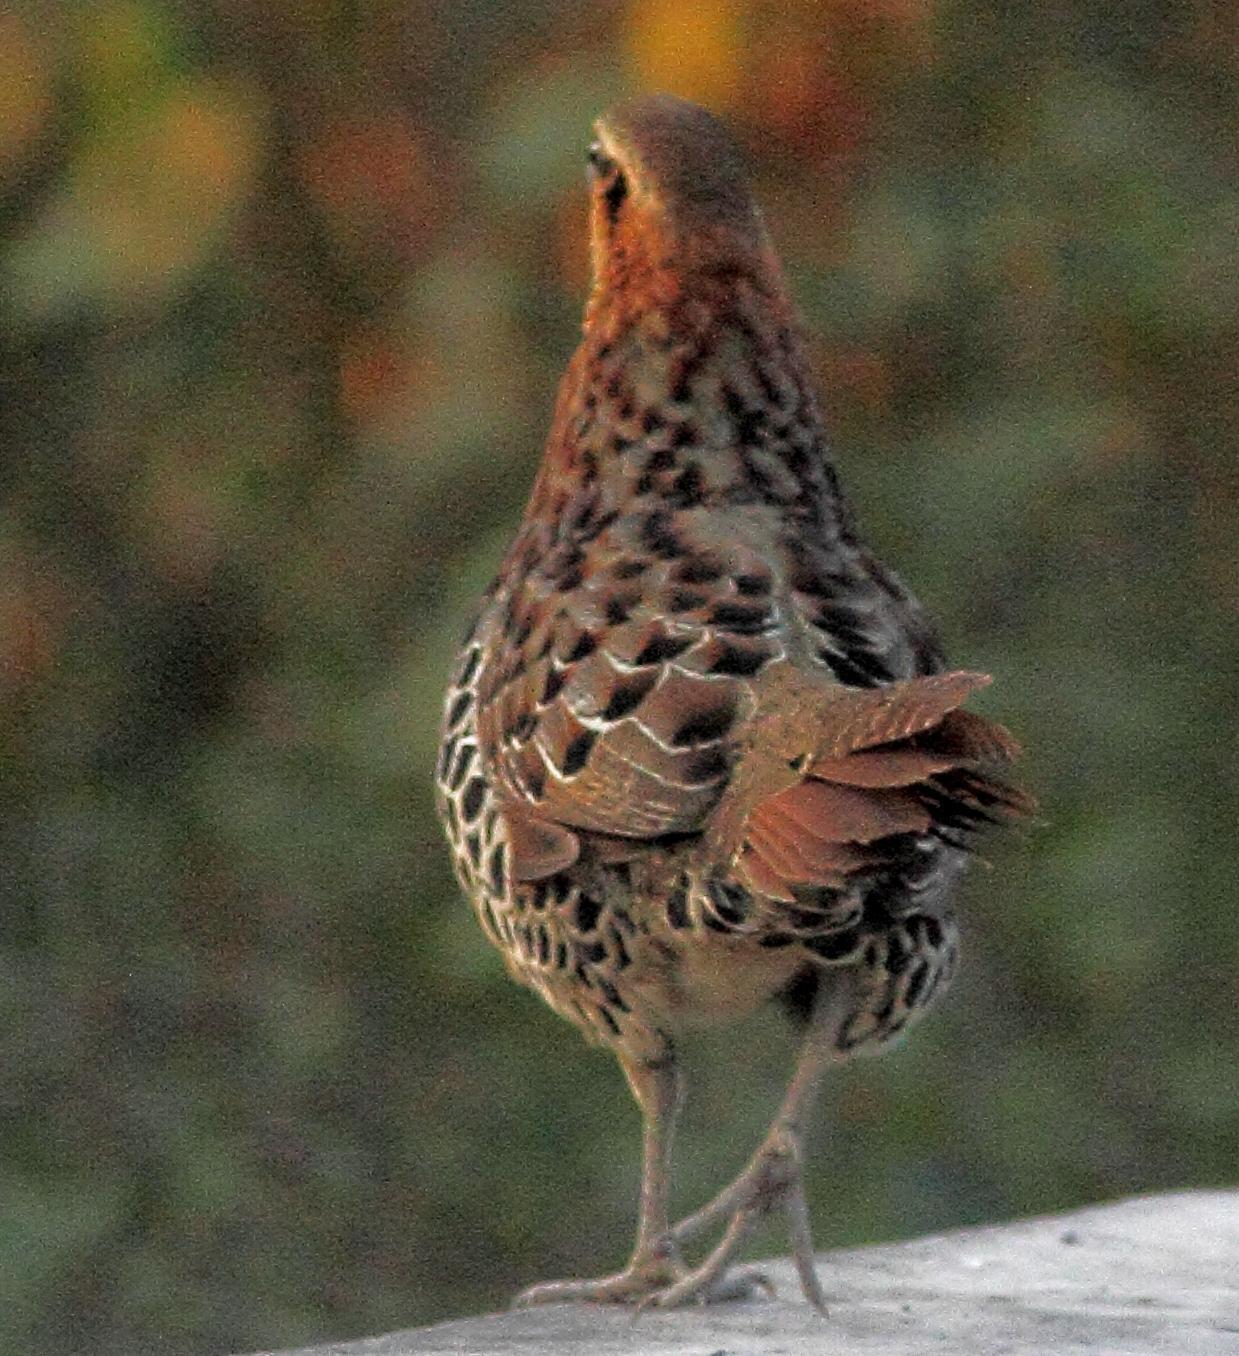 Mountain Bamboo-Partridge Photo by Lee Harding